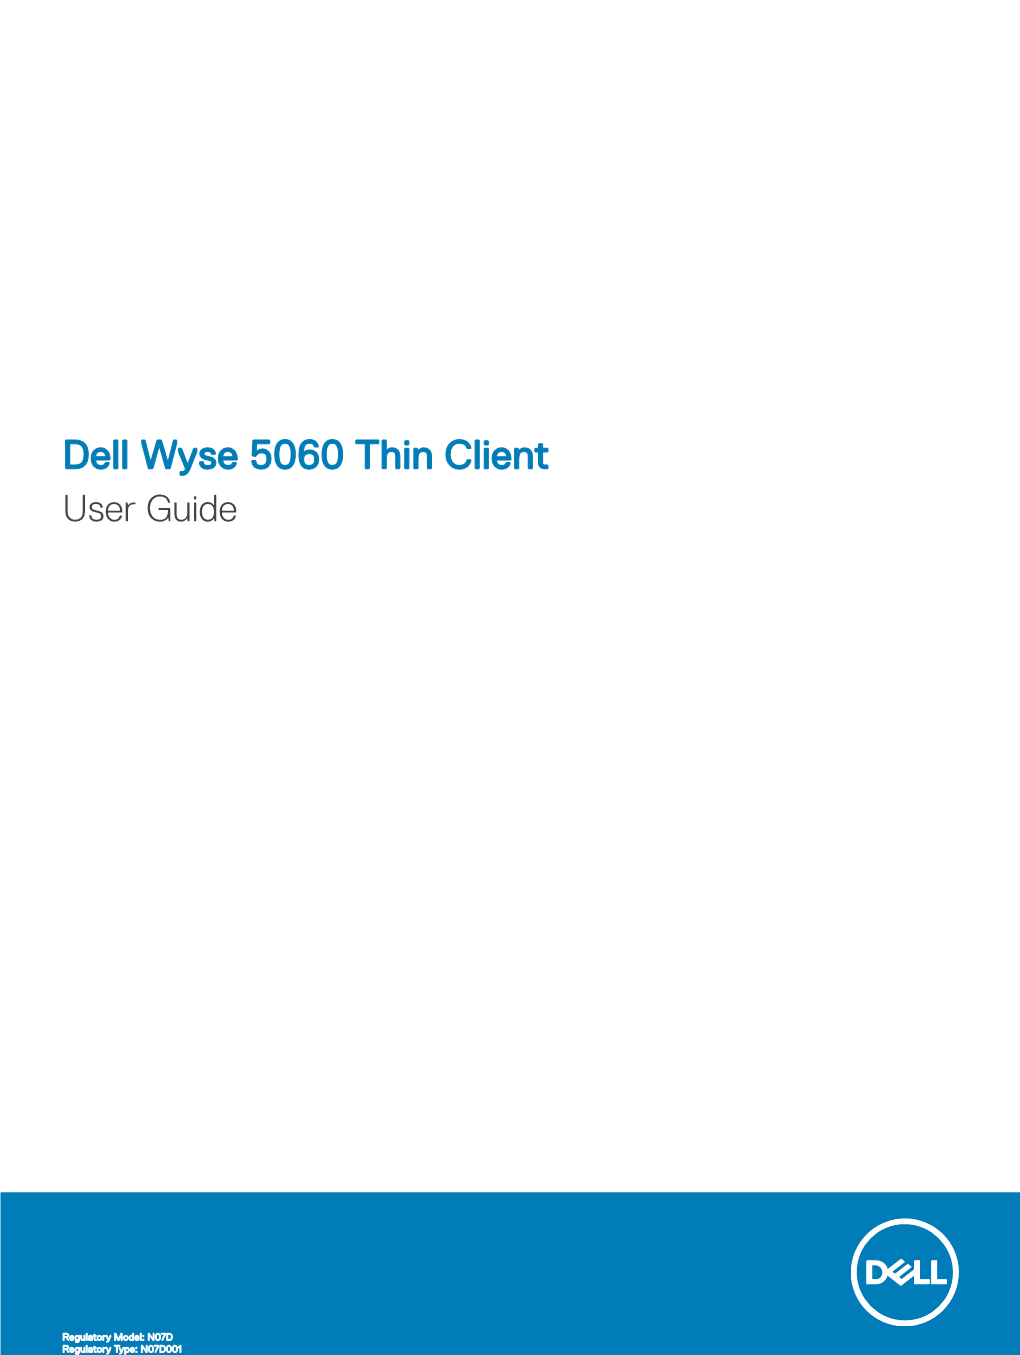 Dell Wyse 5060 Thin Client User Guide